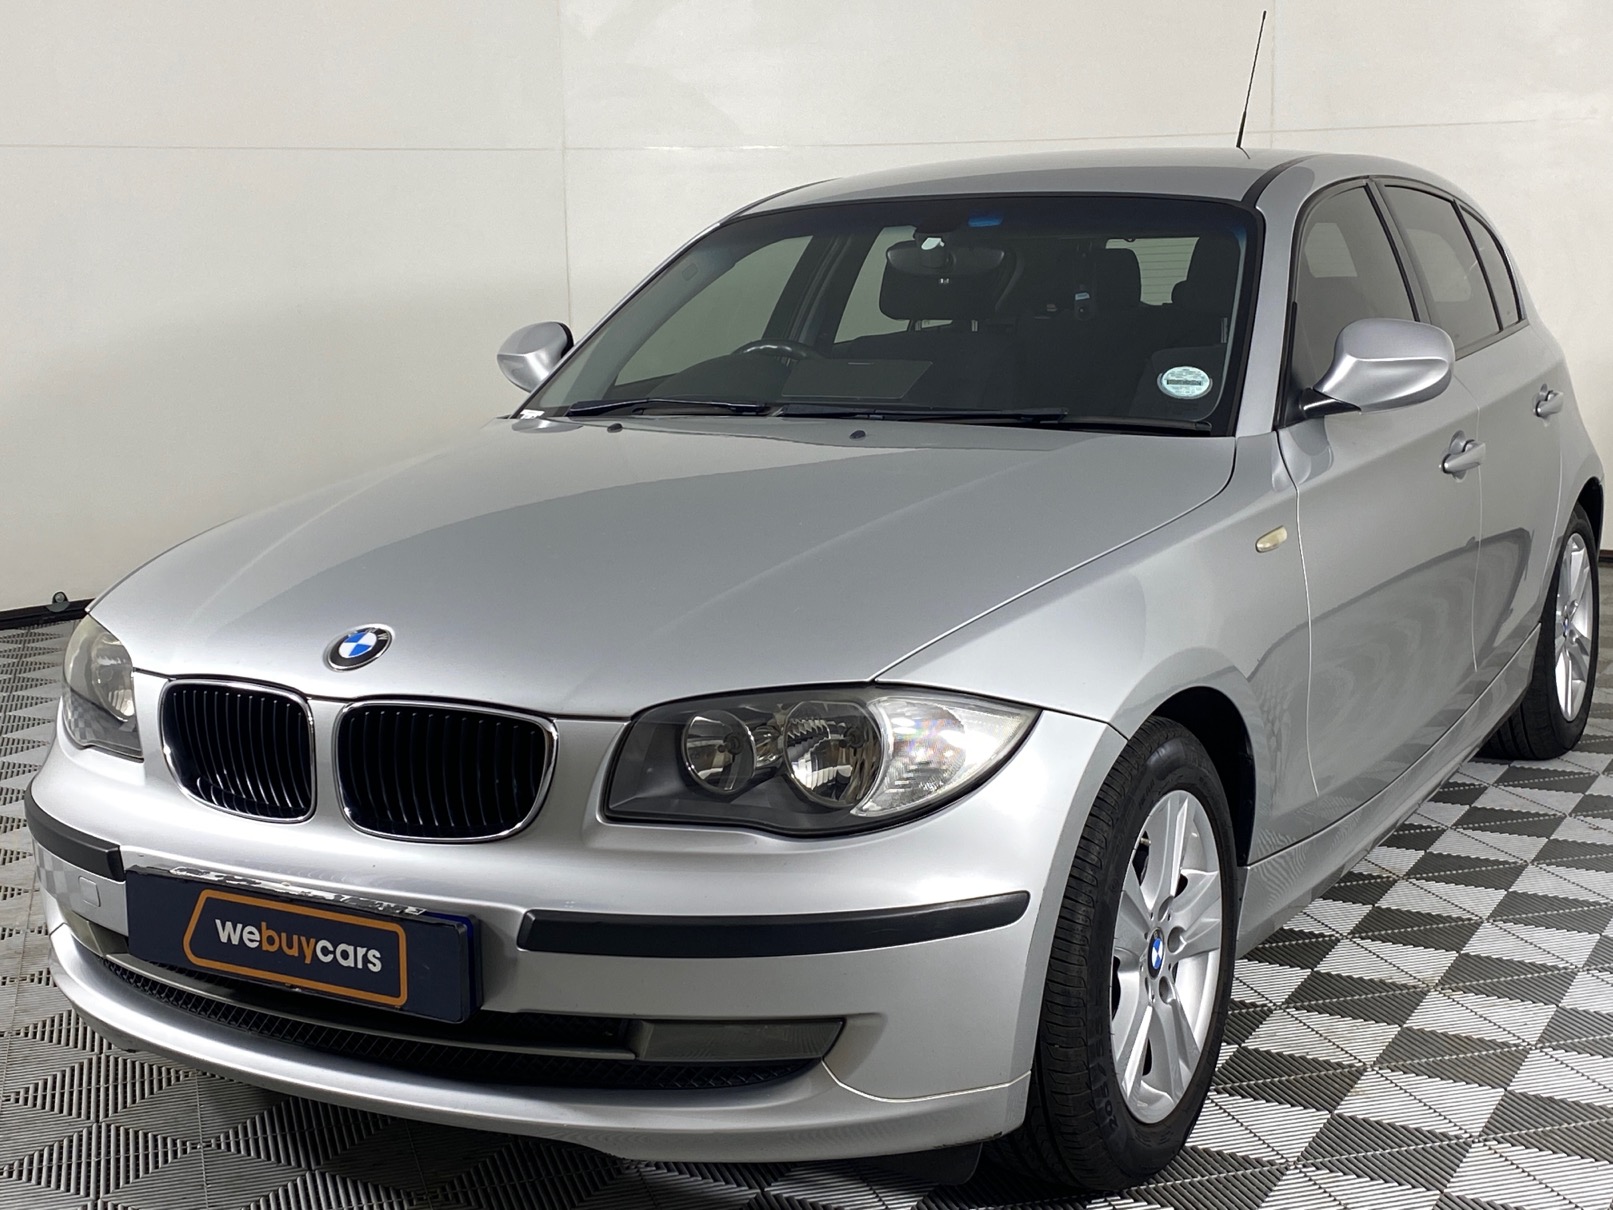 Used 2009 BMW 1 Series 120d (E87) for sale WeBuyCars